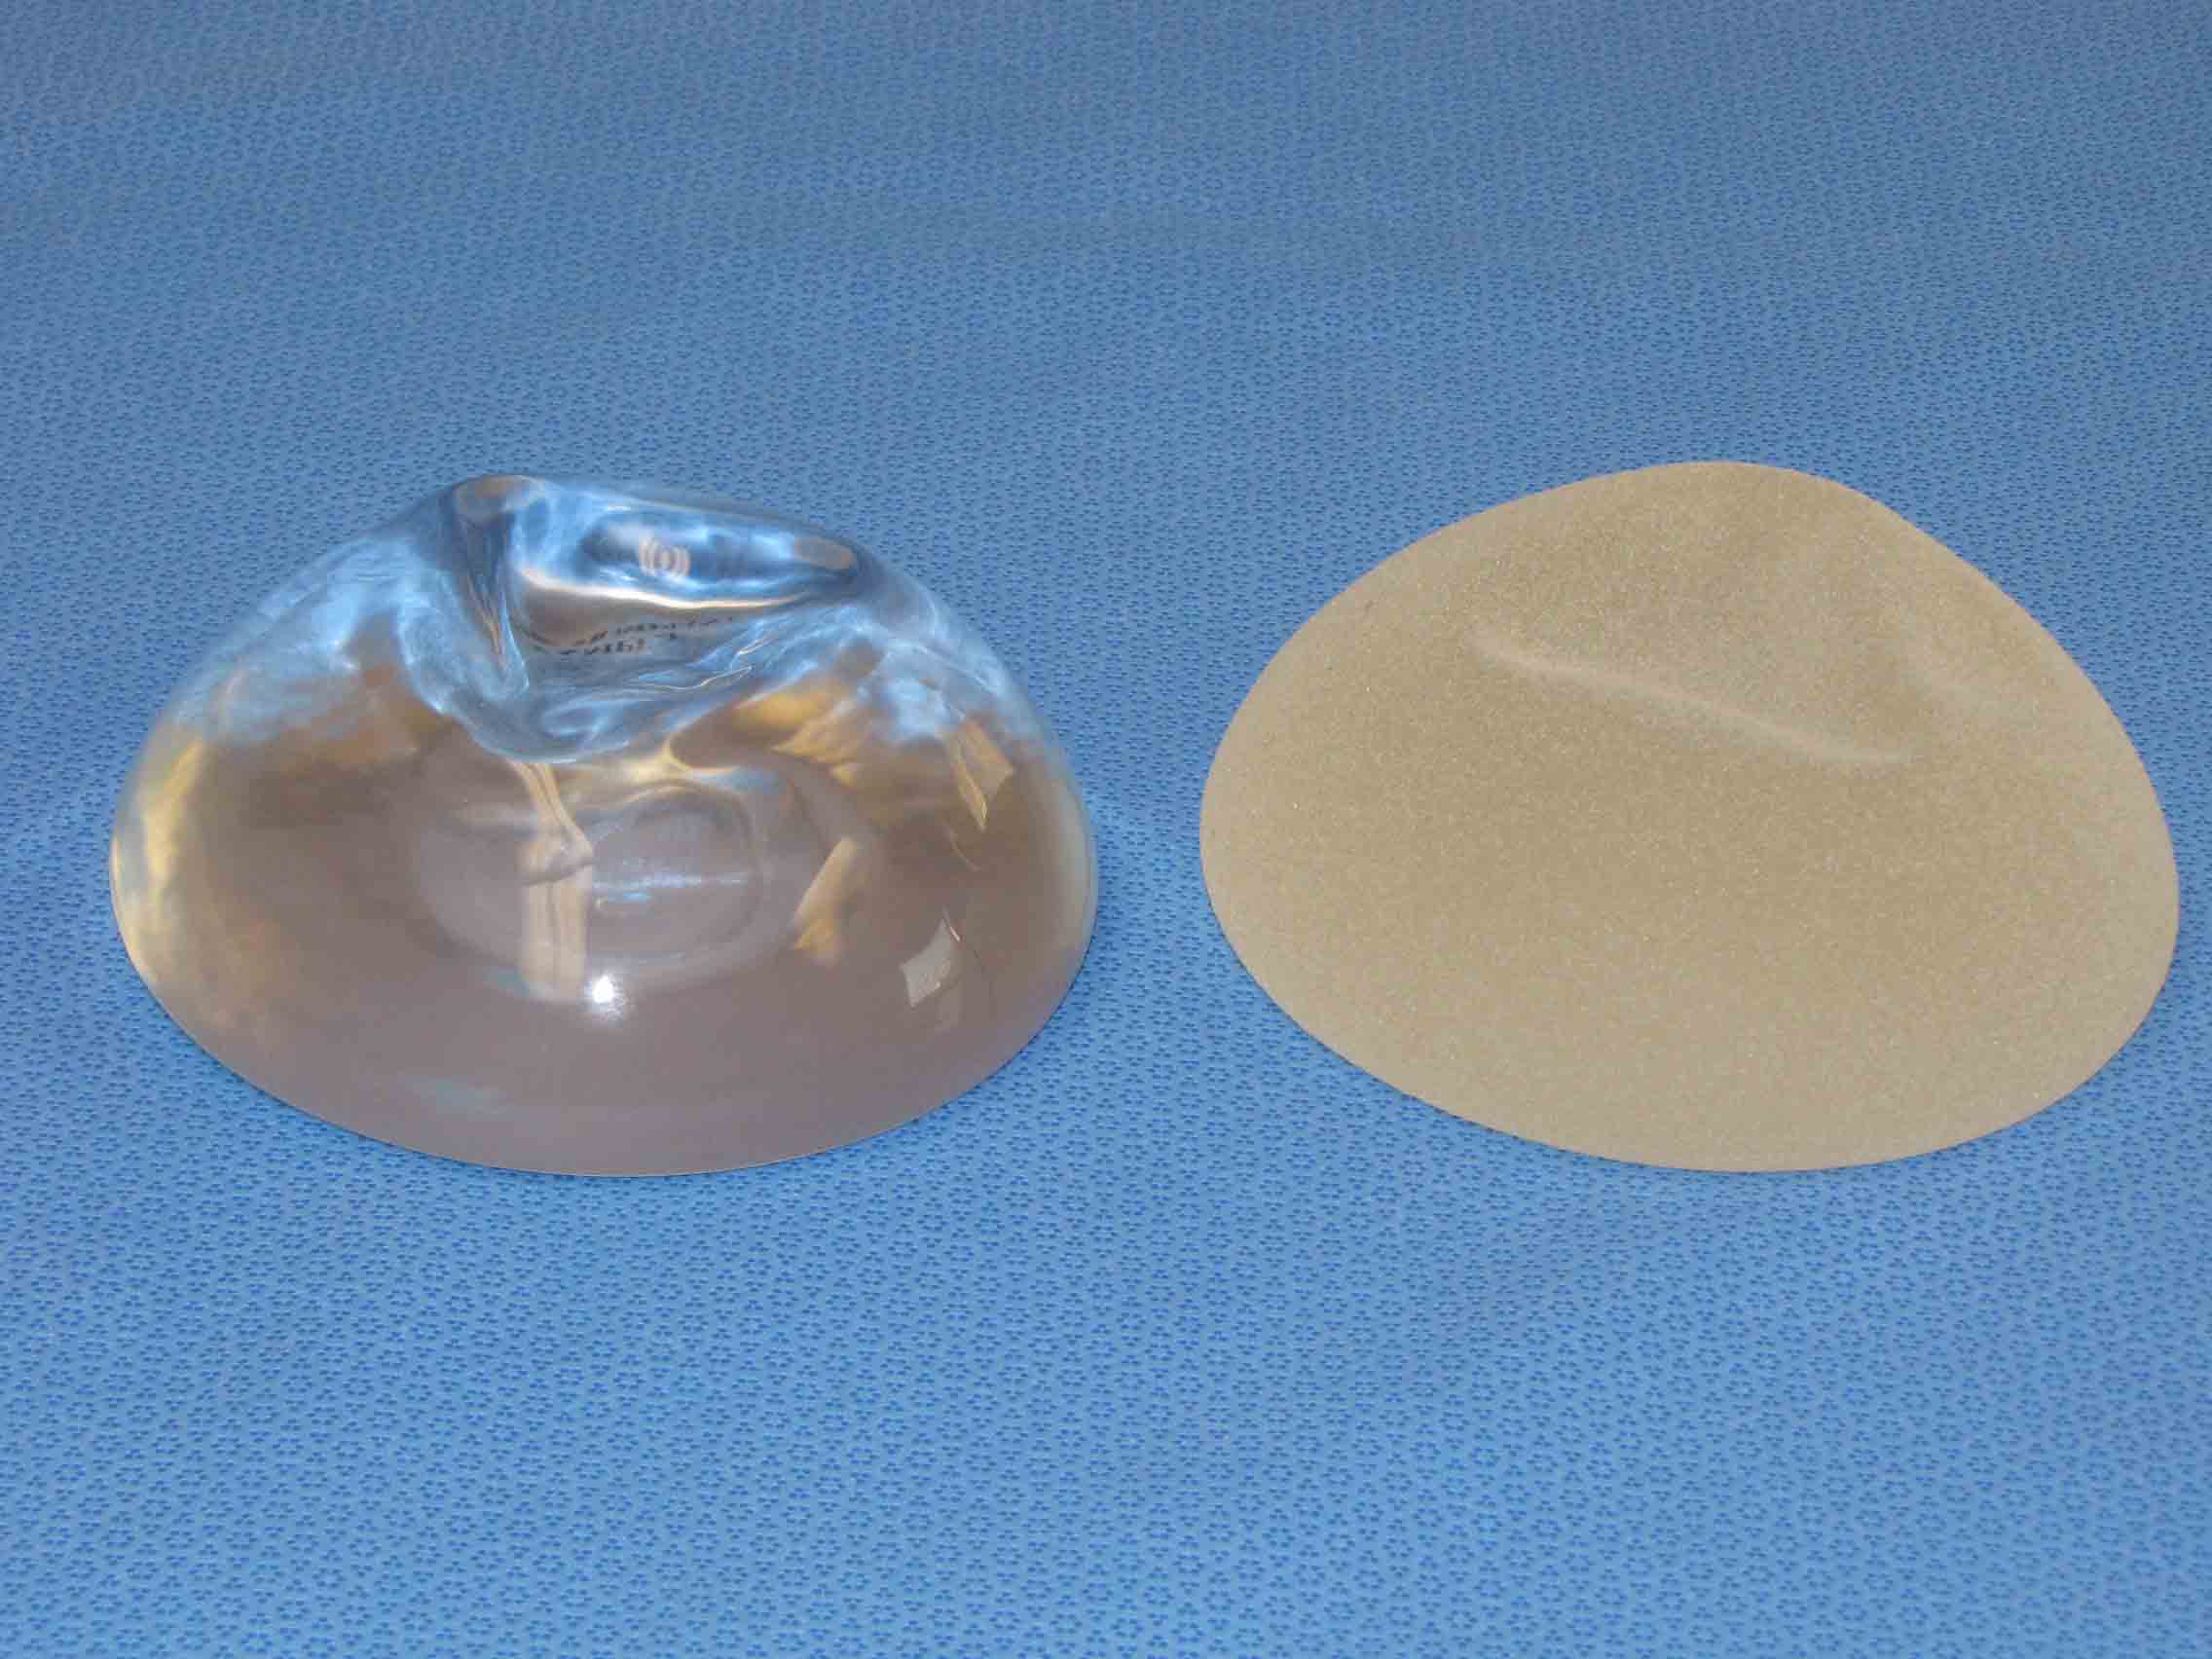 Smooth(left) and a textured(right) silicone implants